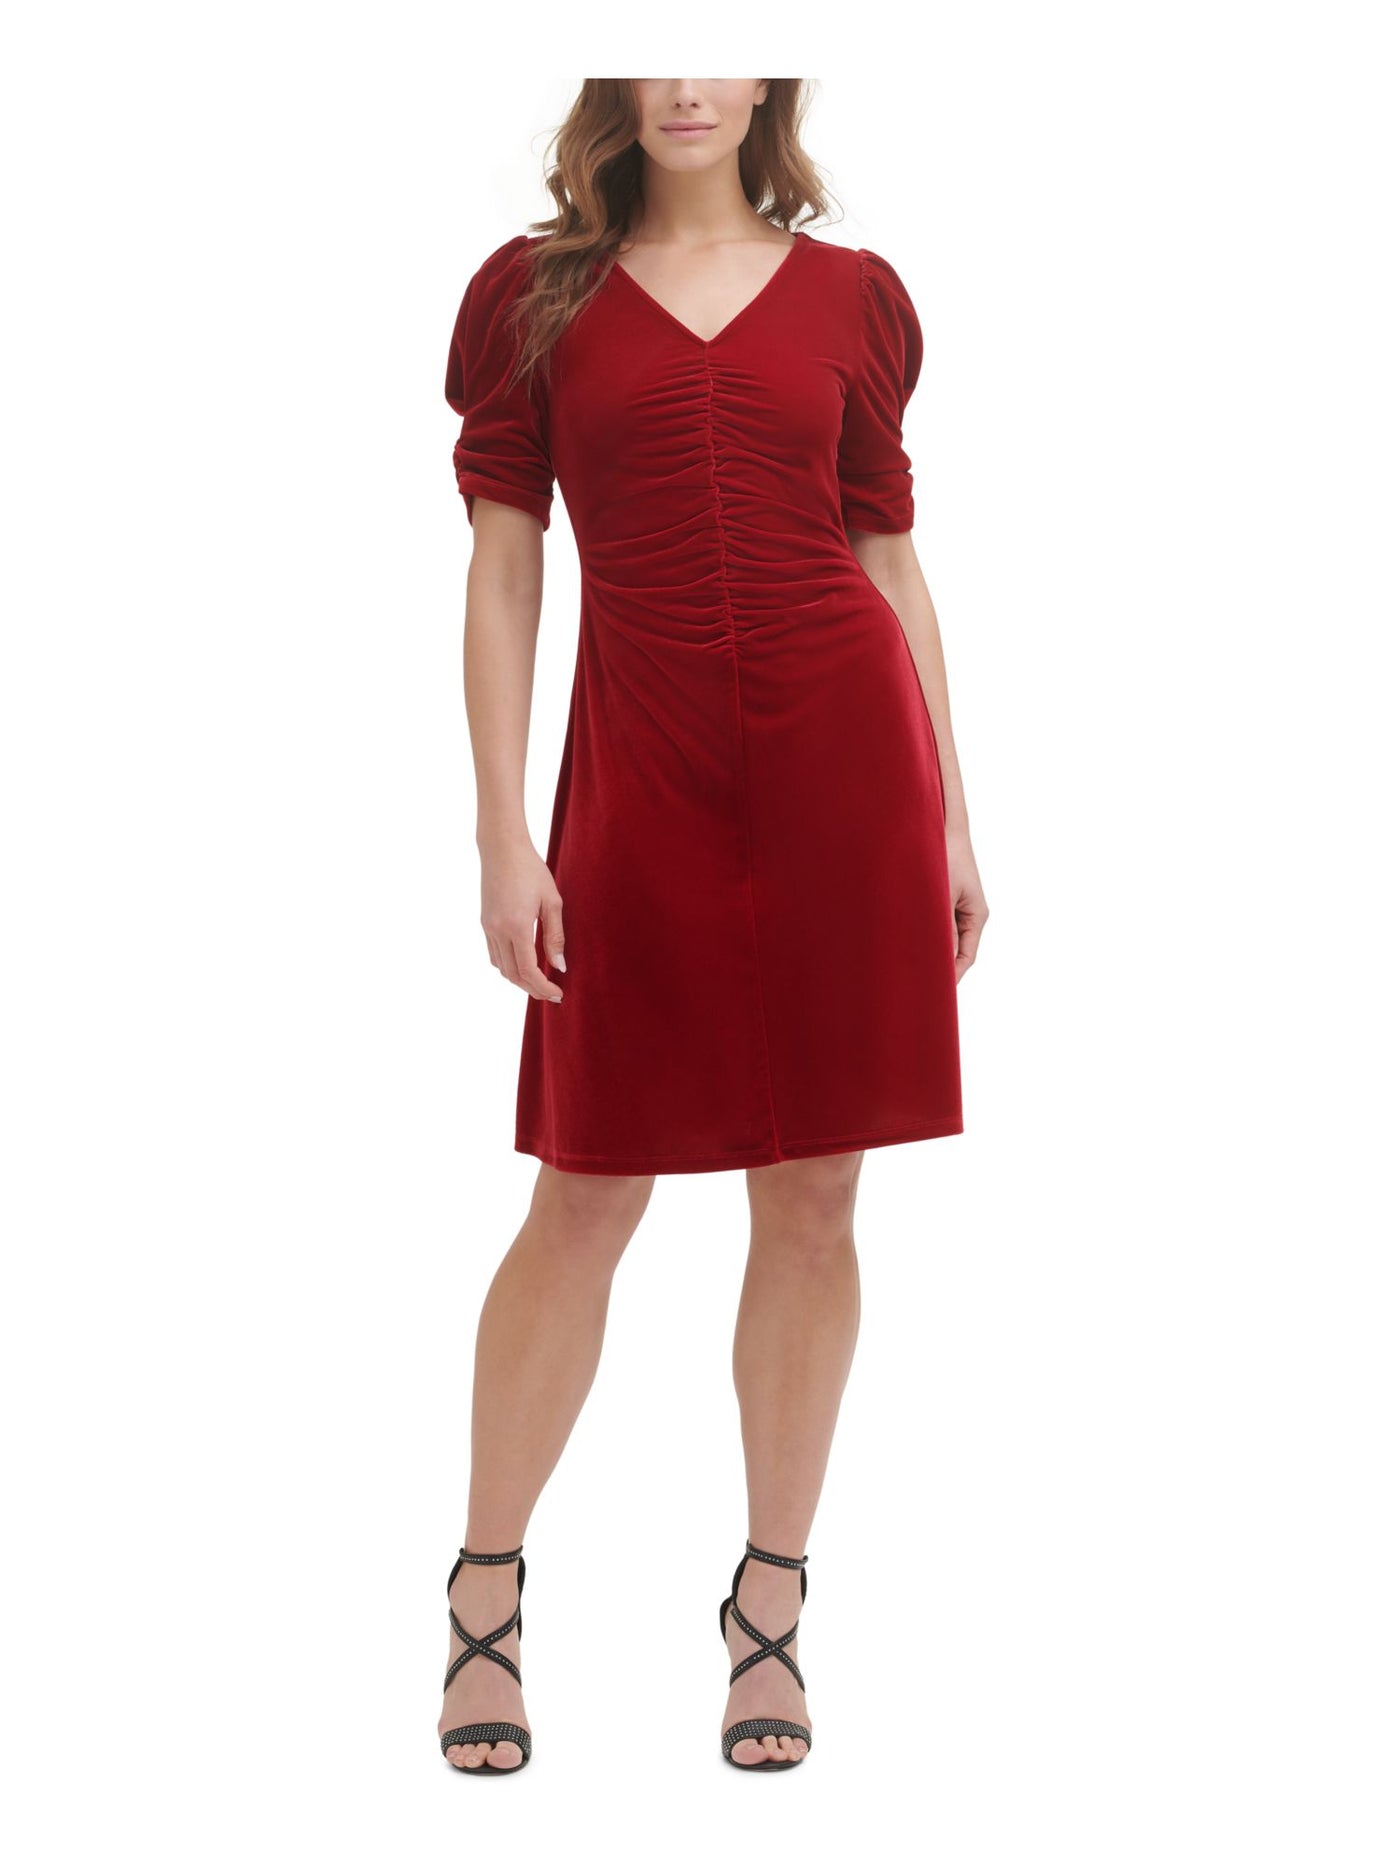 DKNY Womens Red Ruched Zippered Velvet Textured Pouf Sleeve V Neck Knee Length Party Sheath Dress 10